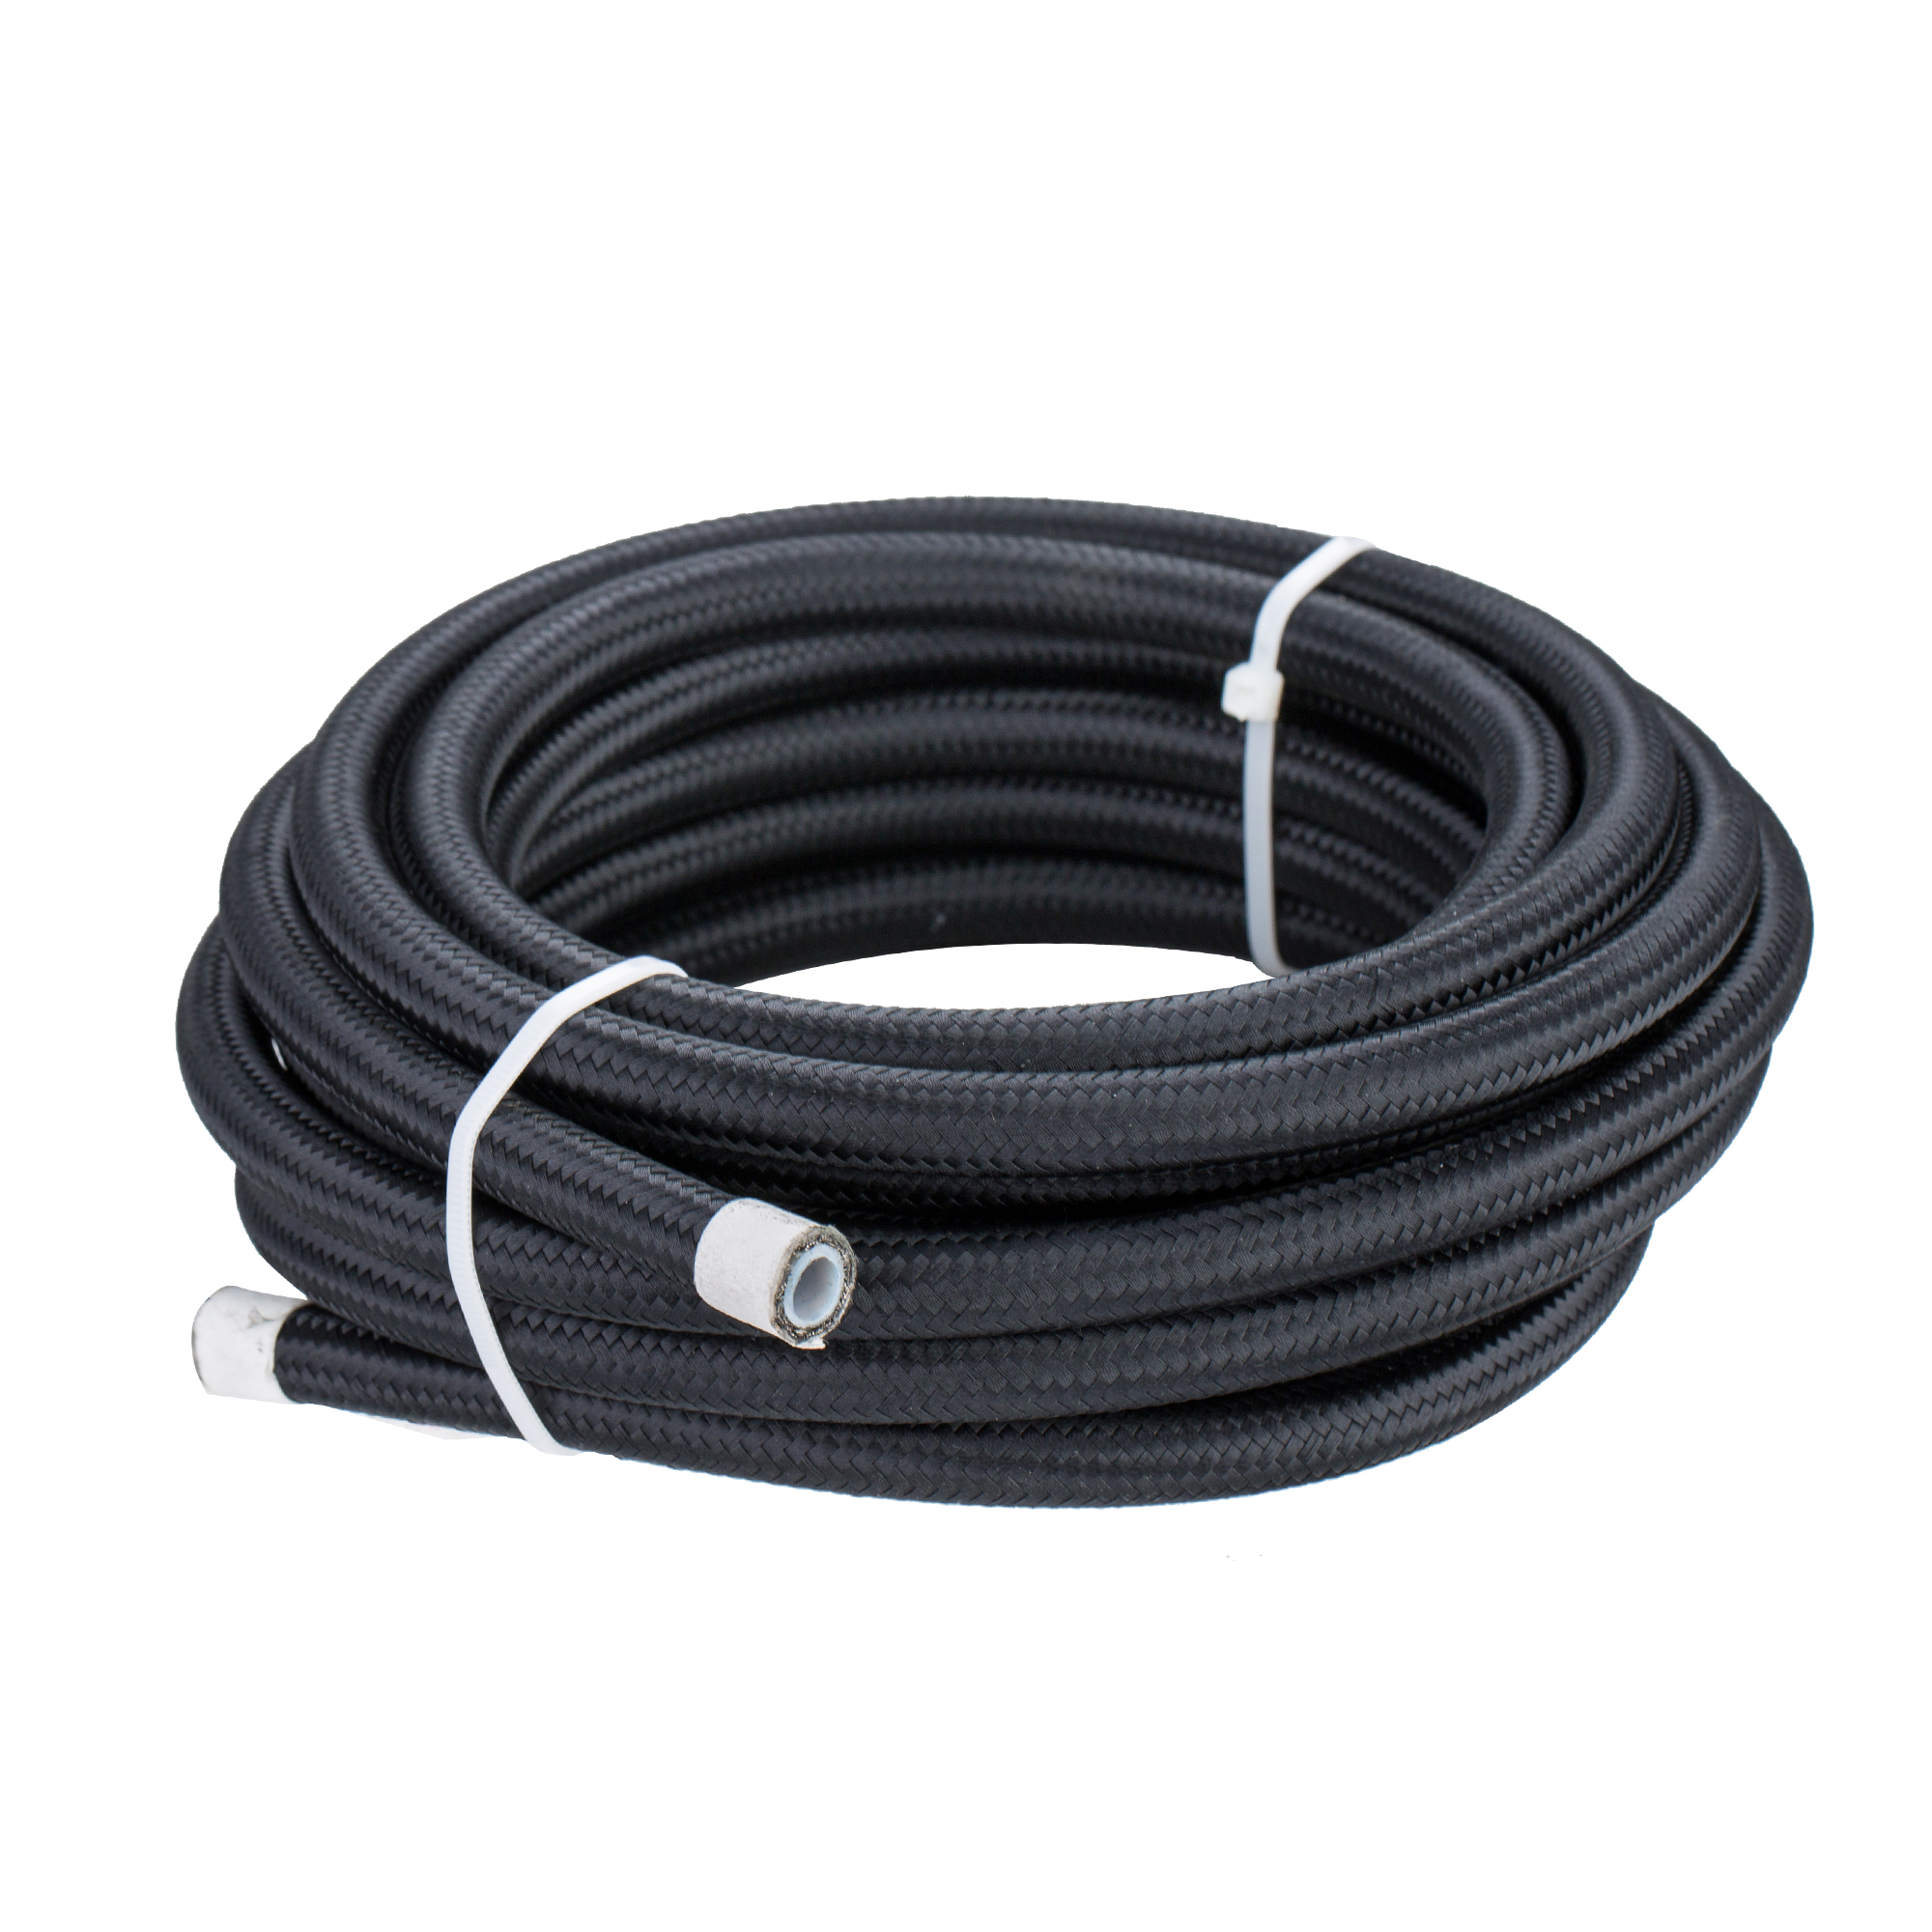 HaoFa Universal Racing Full Flow AN12 PTFE Fuel Line Oil Hose for Toyota, Honda, Ford, Nissan